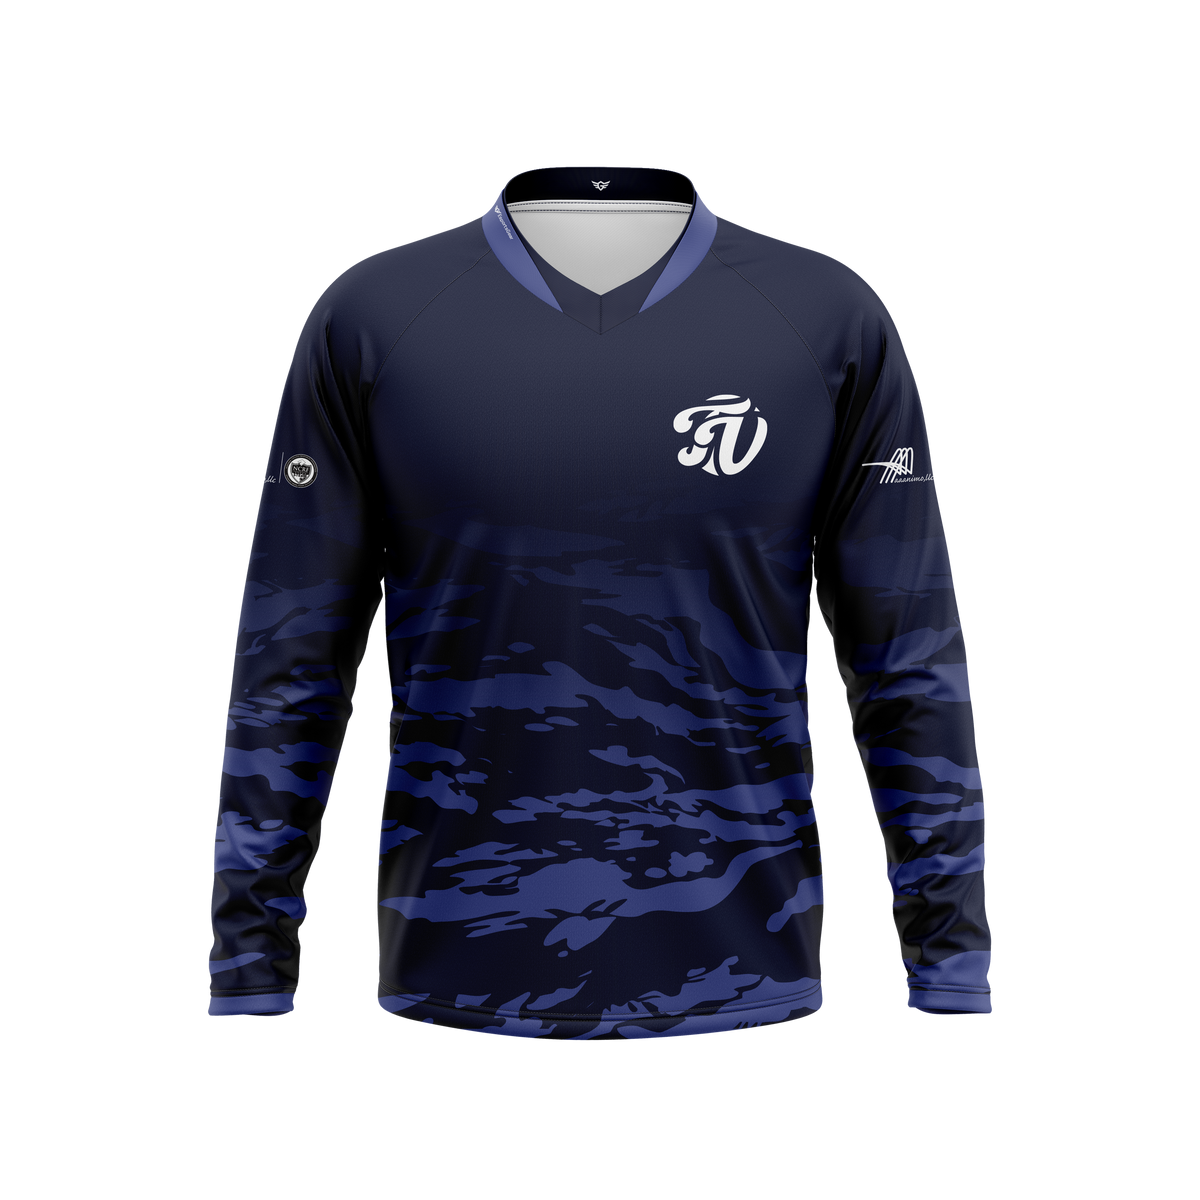 The Vintage Long Sleeve Jersey